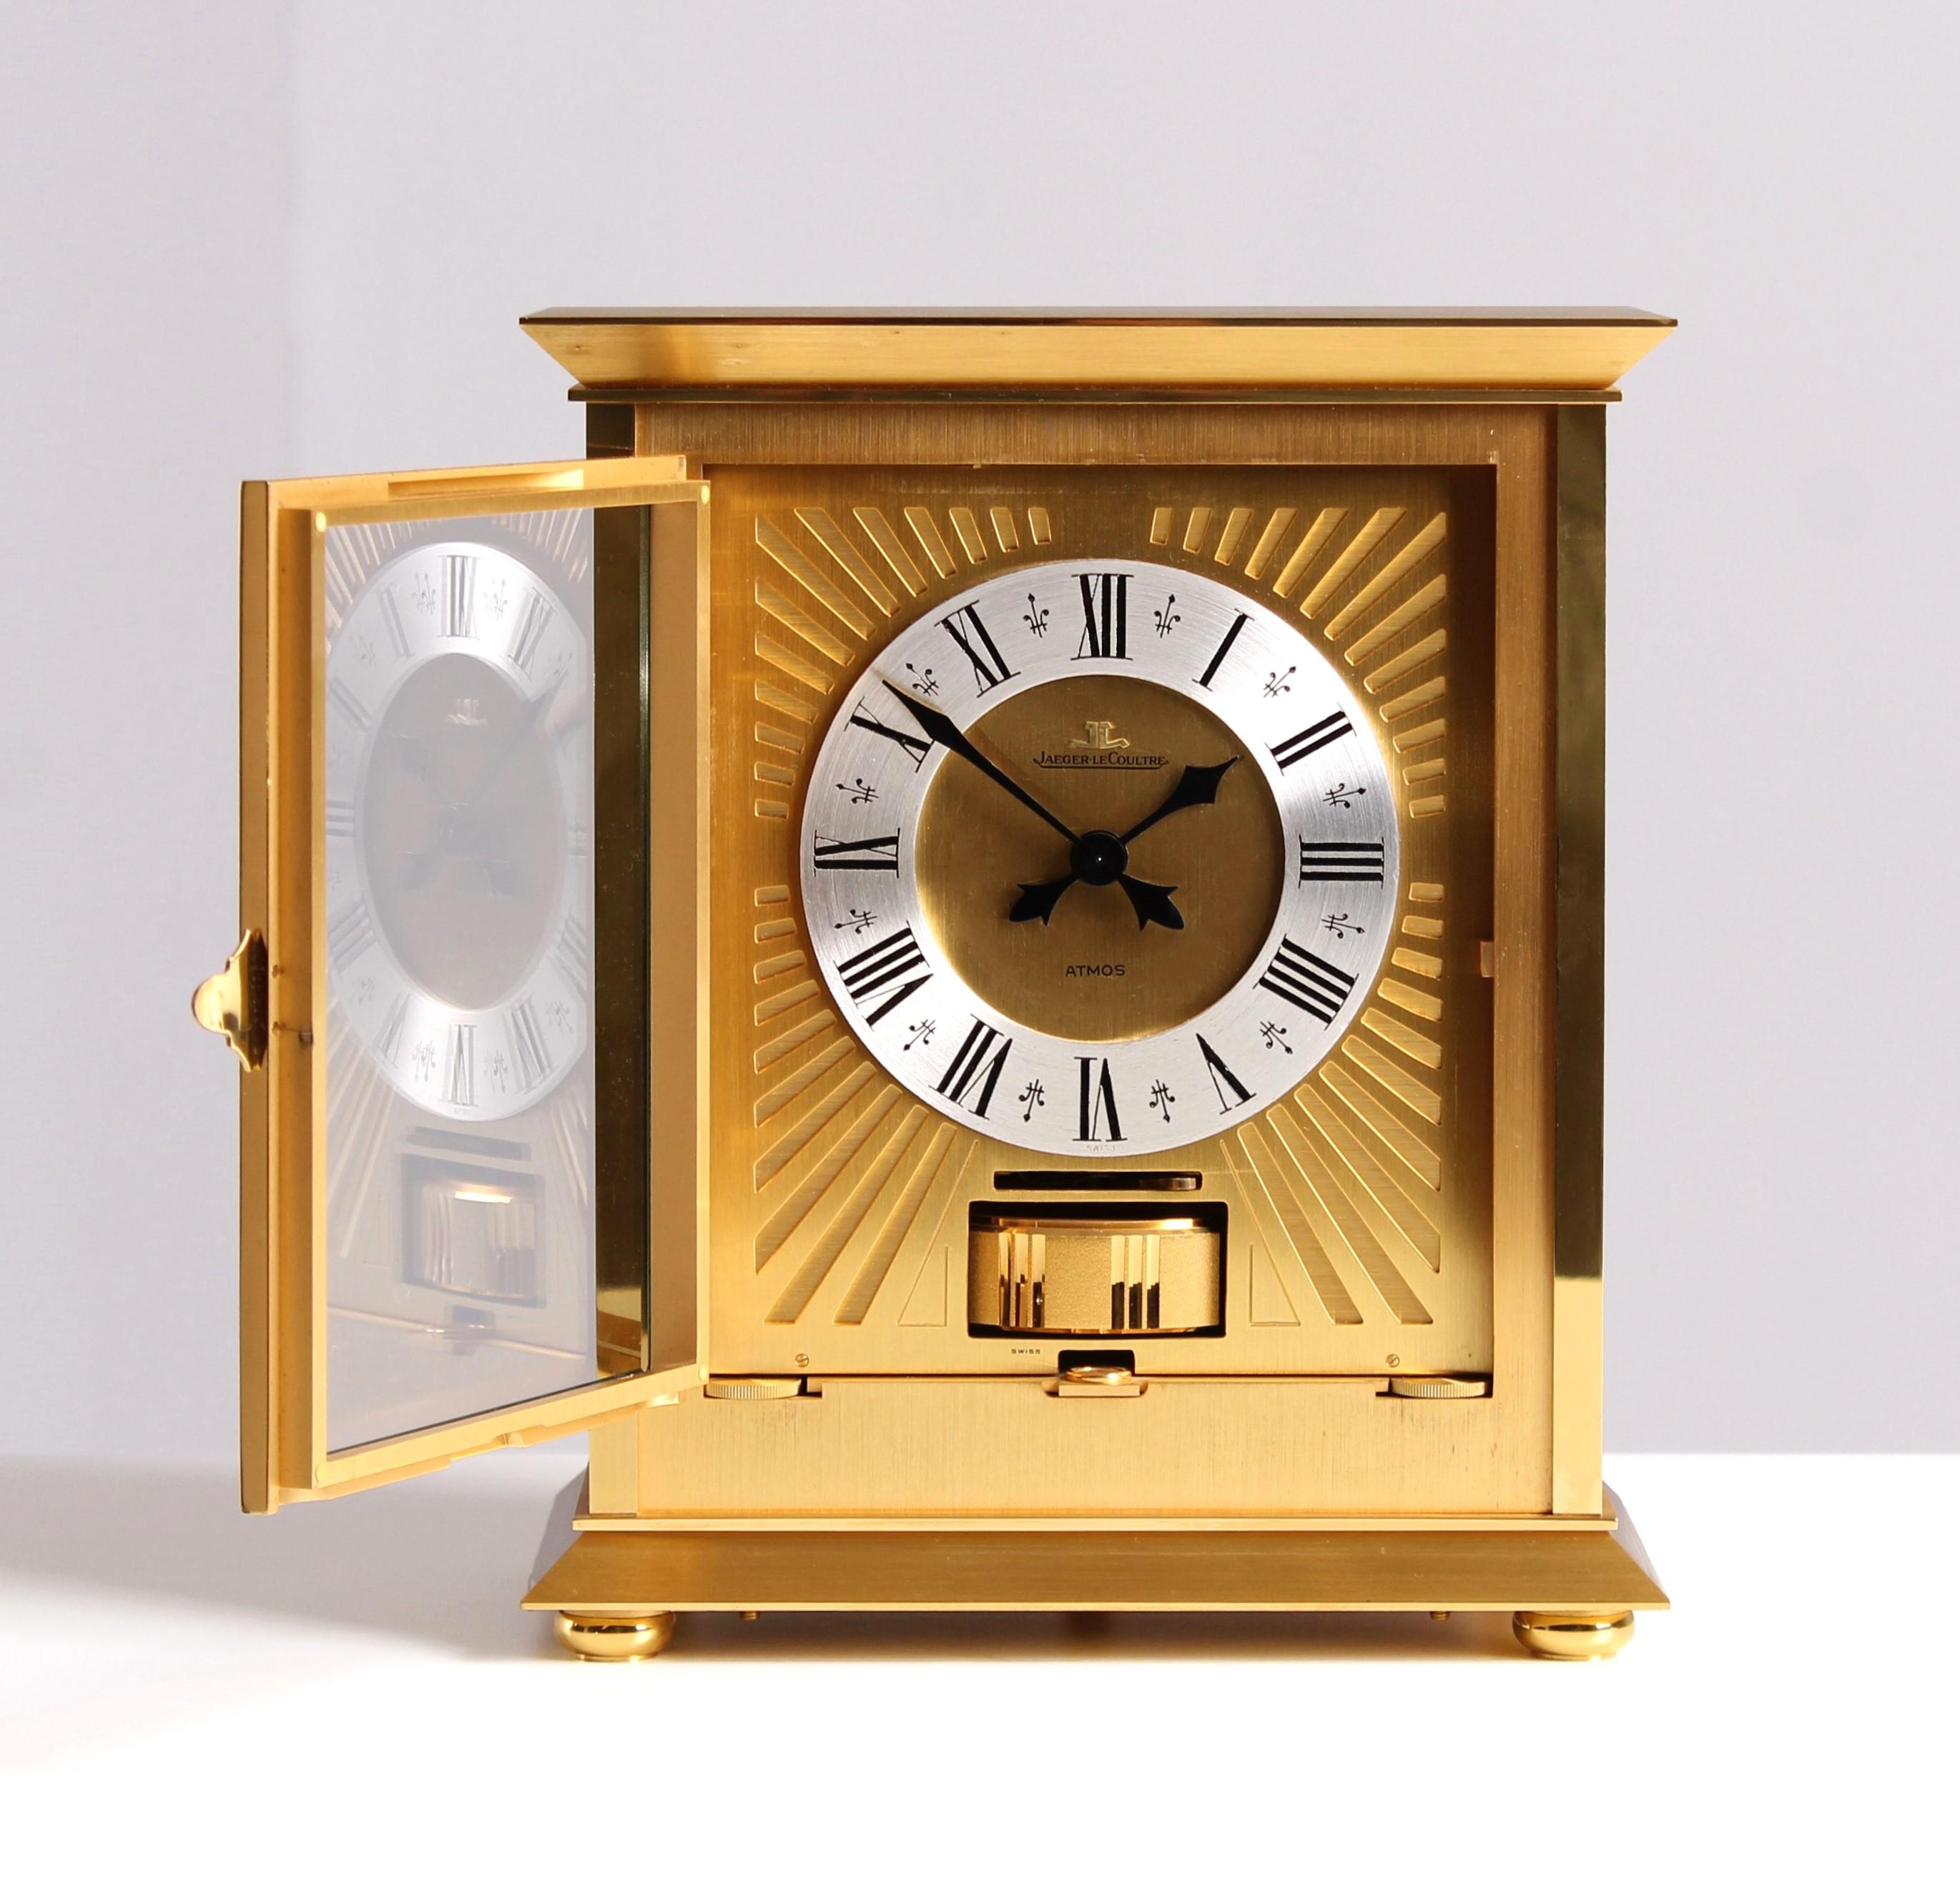 Jaeger LeCoultre - Atmos Royale

Switzerland
Gold-plated brass
Year of manufacture 1978

Dimensions: H x W x D: 27 x 23 x 14 cm

Description:
Atmos Royale Ref. 5814 in a completely gold-plated brass case. Glazed front door. Silver circular-cut